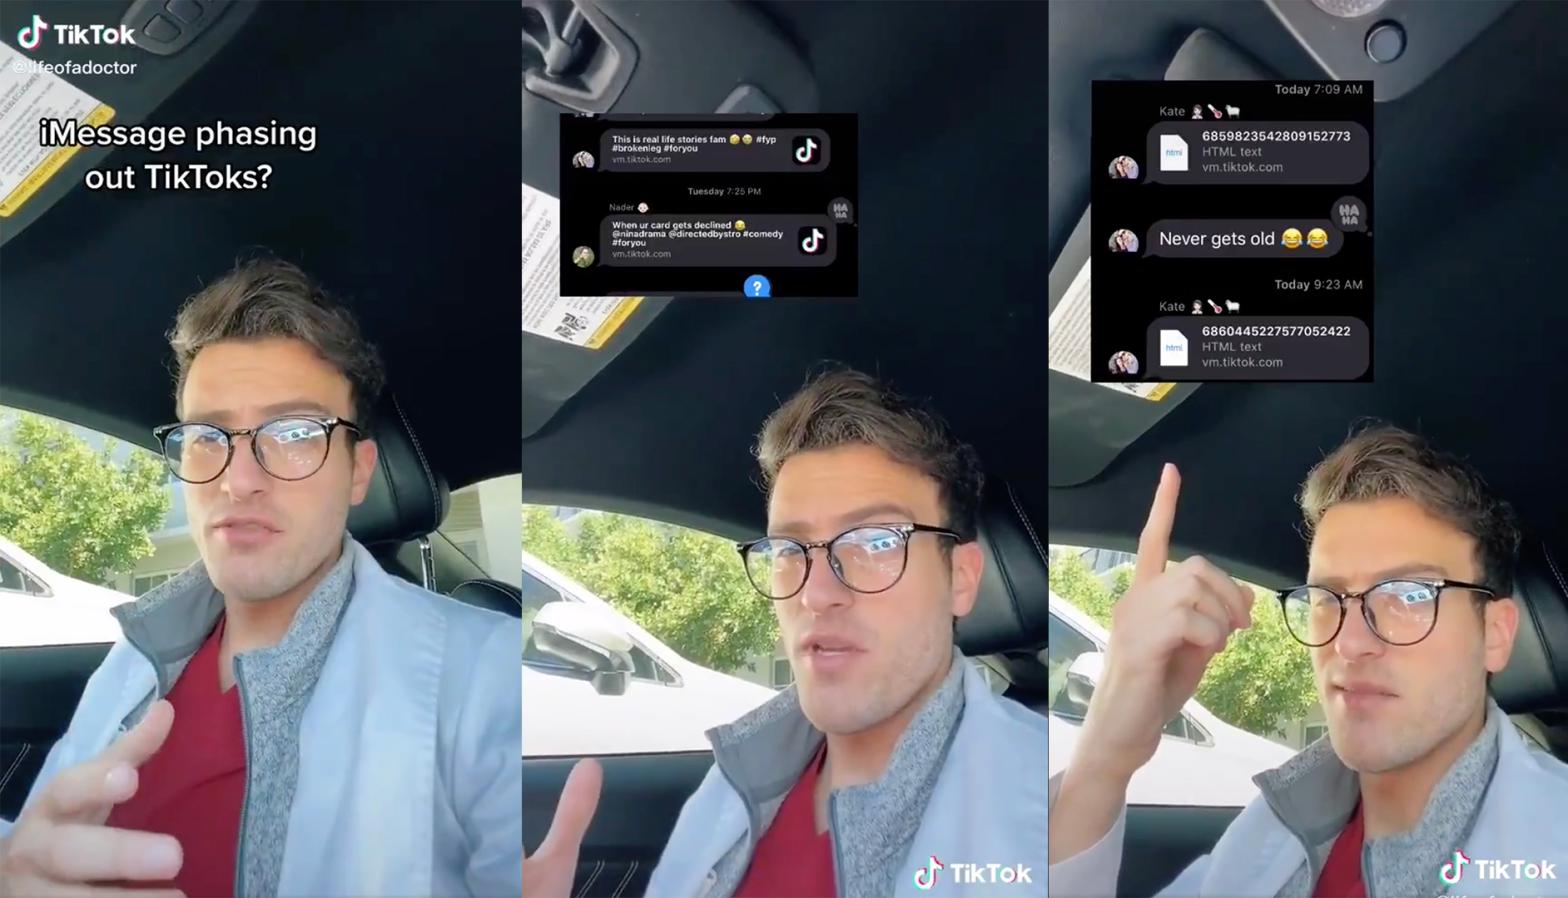 Still images from a TikTok about iMessage